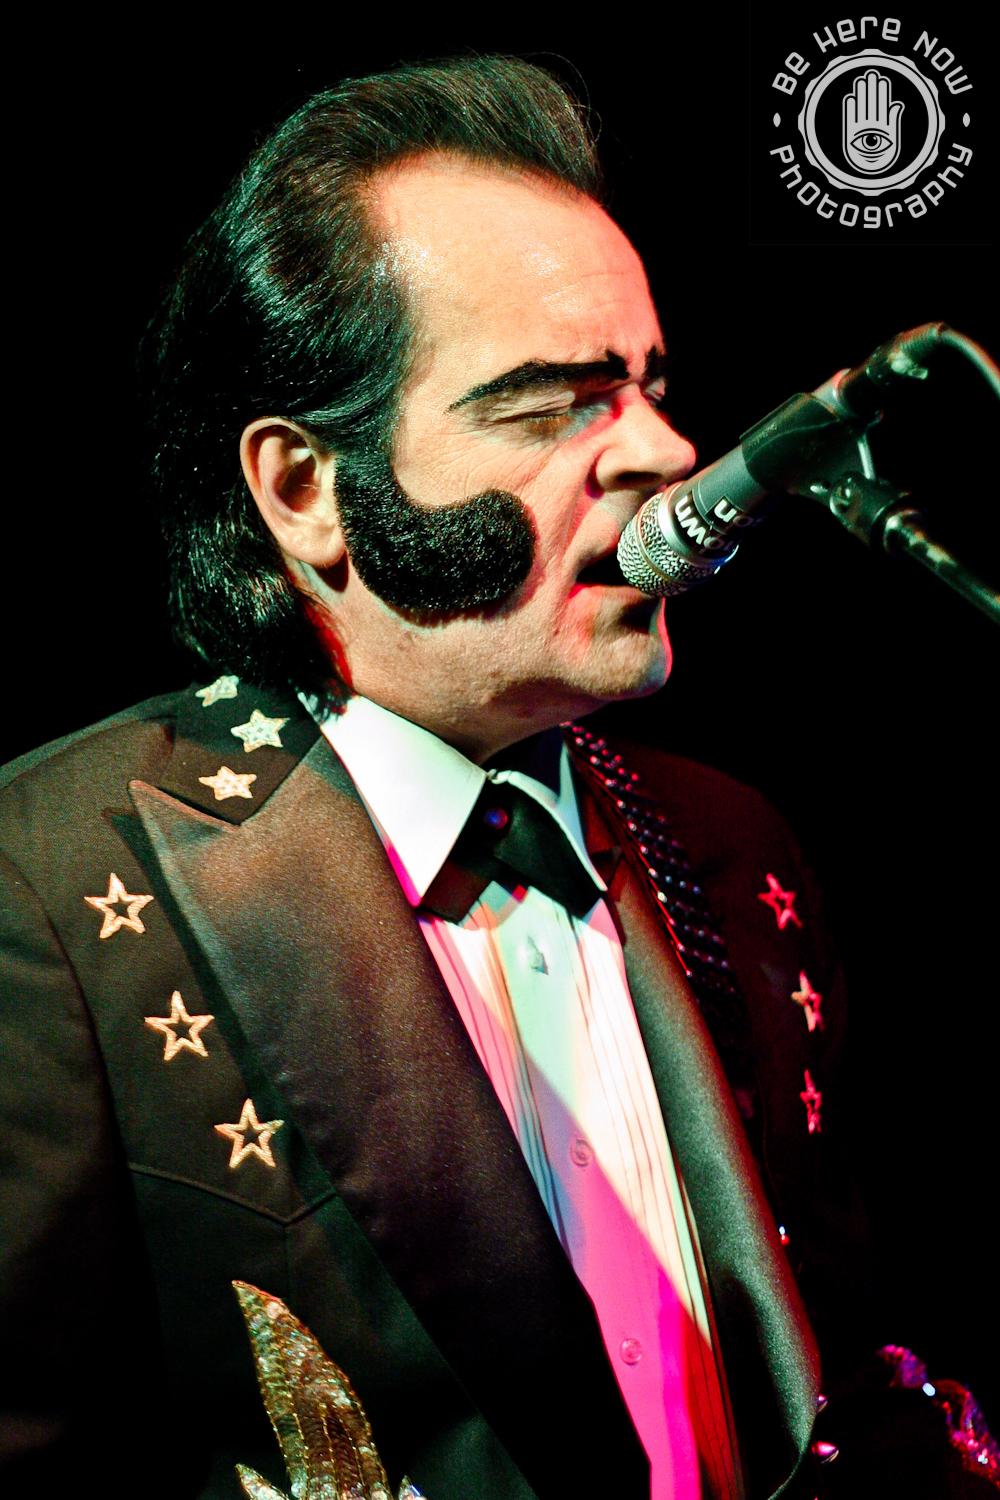 Unknown Hinson Wallpapers